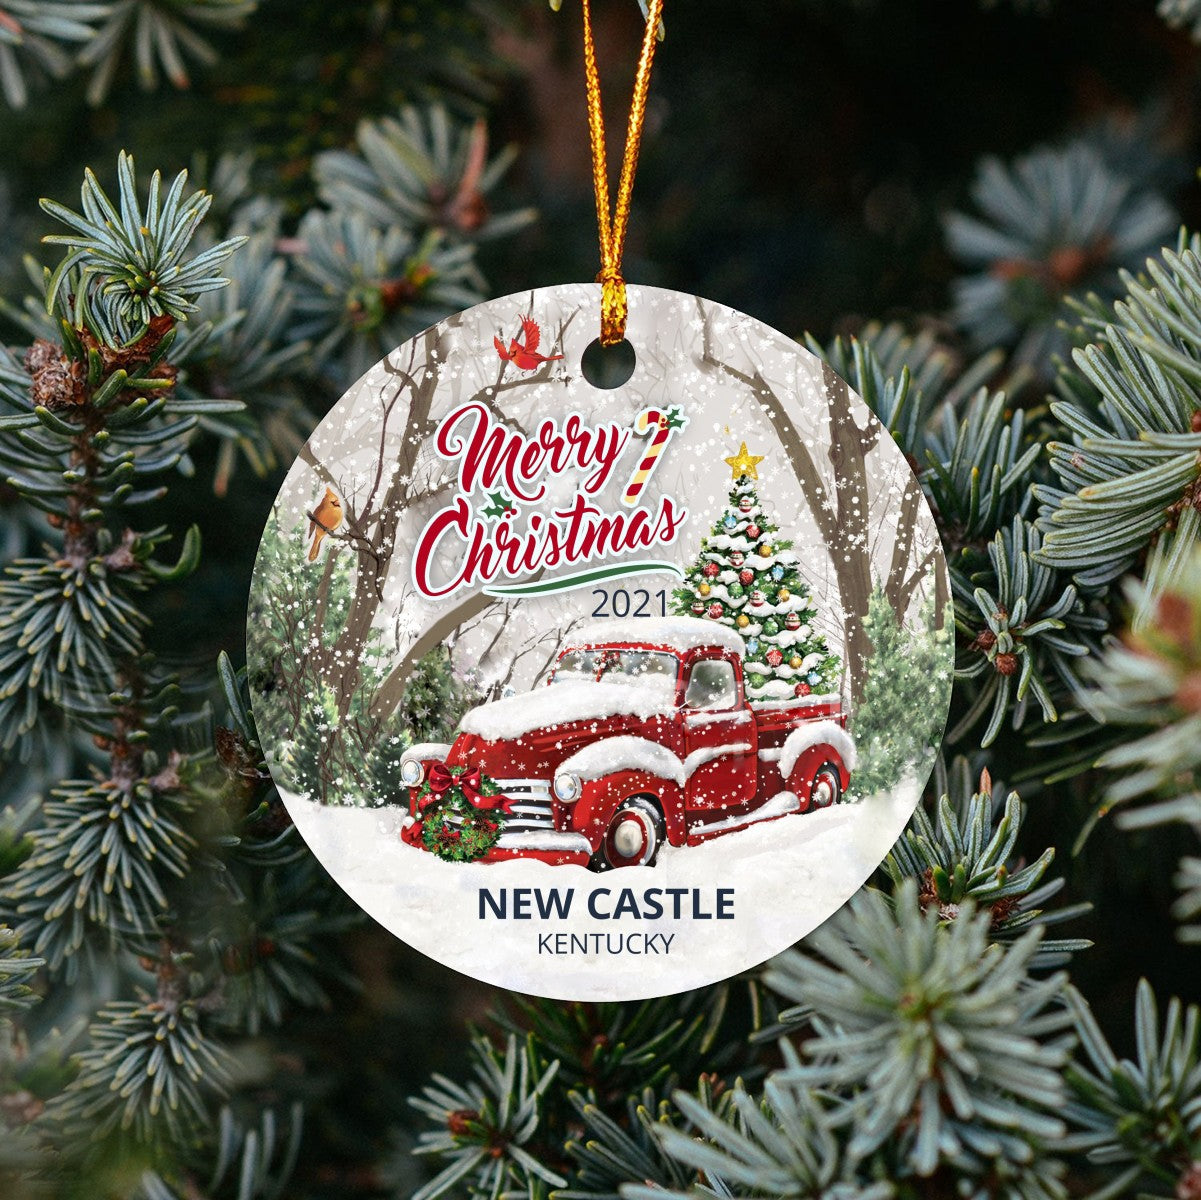 Christmas Tree Ornaments New Castle - Ornament With Name City, State New Castle Kentucky KY Ornament - Red Truck Xmas Ornaments 3'' Plastic Gift For Family, Friend And Housewarming